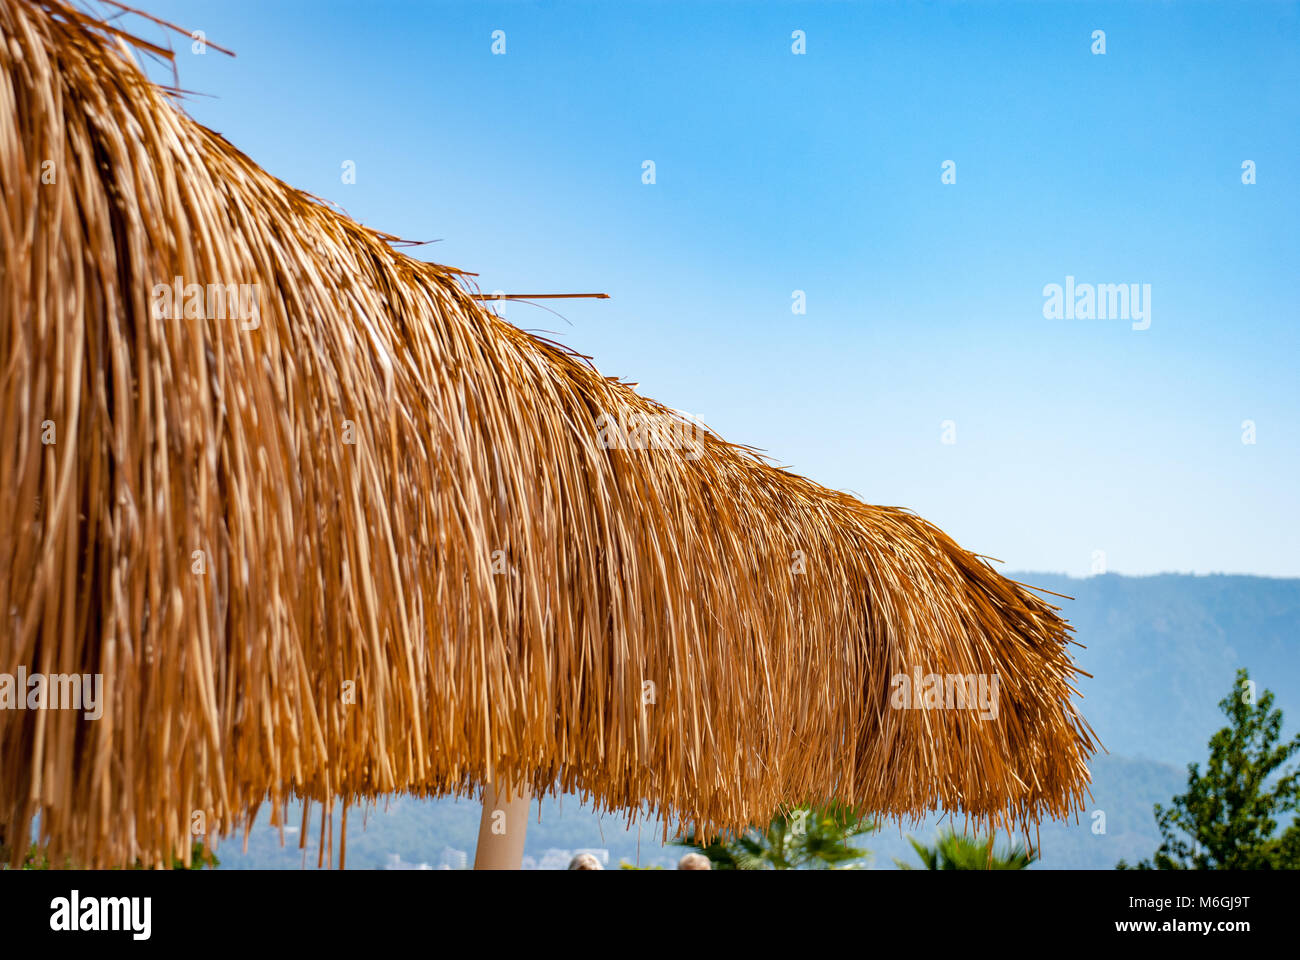 A charming beach bar with a straw thatched roof offers a breezy retreat at a seaside resort Stock Photo